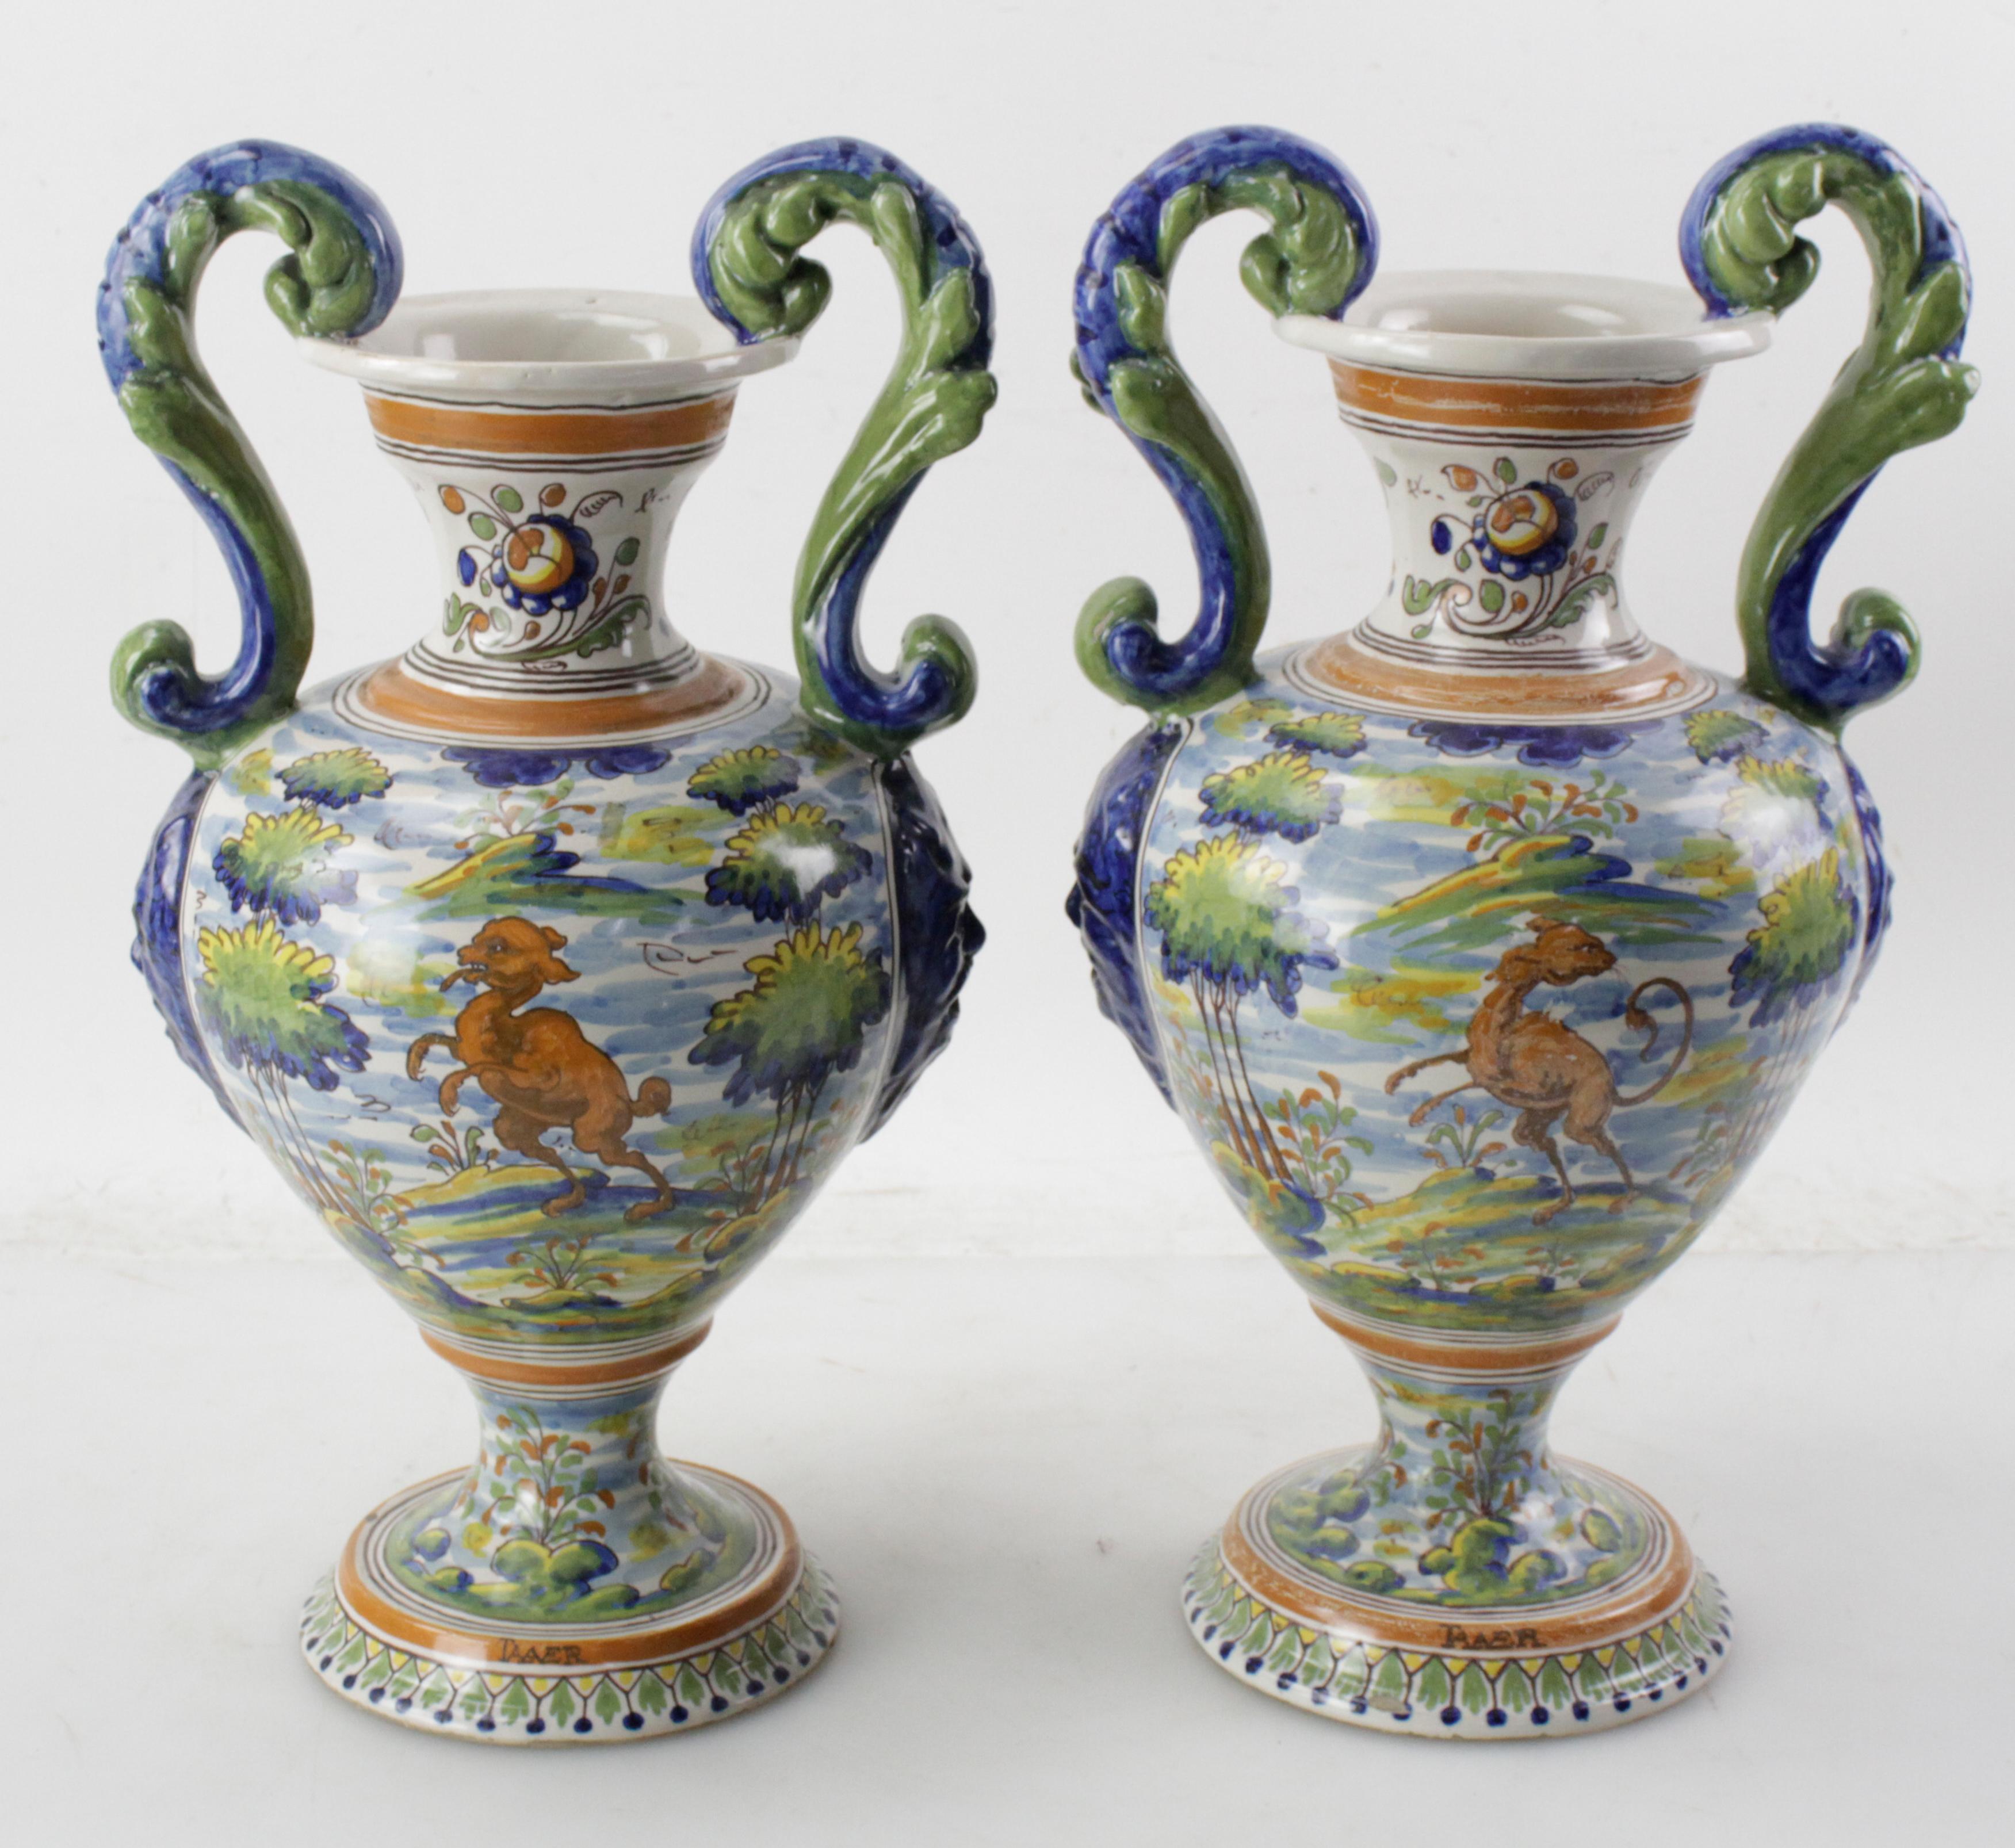 Pair of Antique Italian Majolica Italian Blue and Green Two Handled Urns  For Sale 1